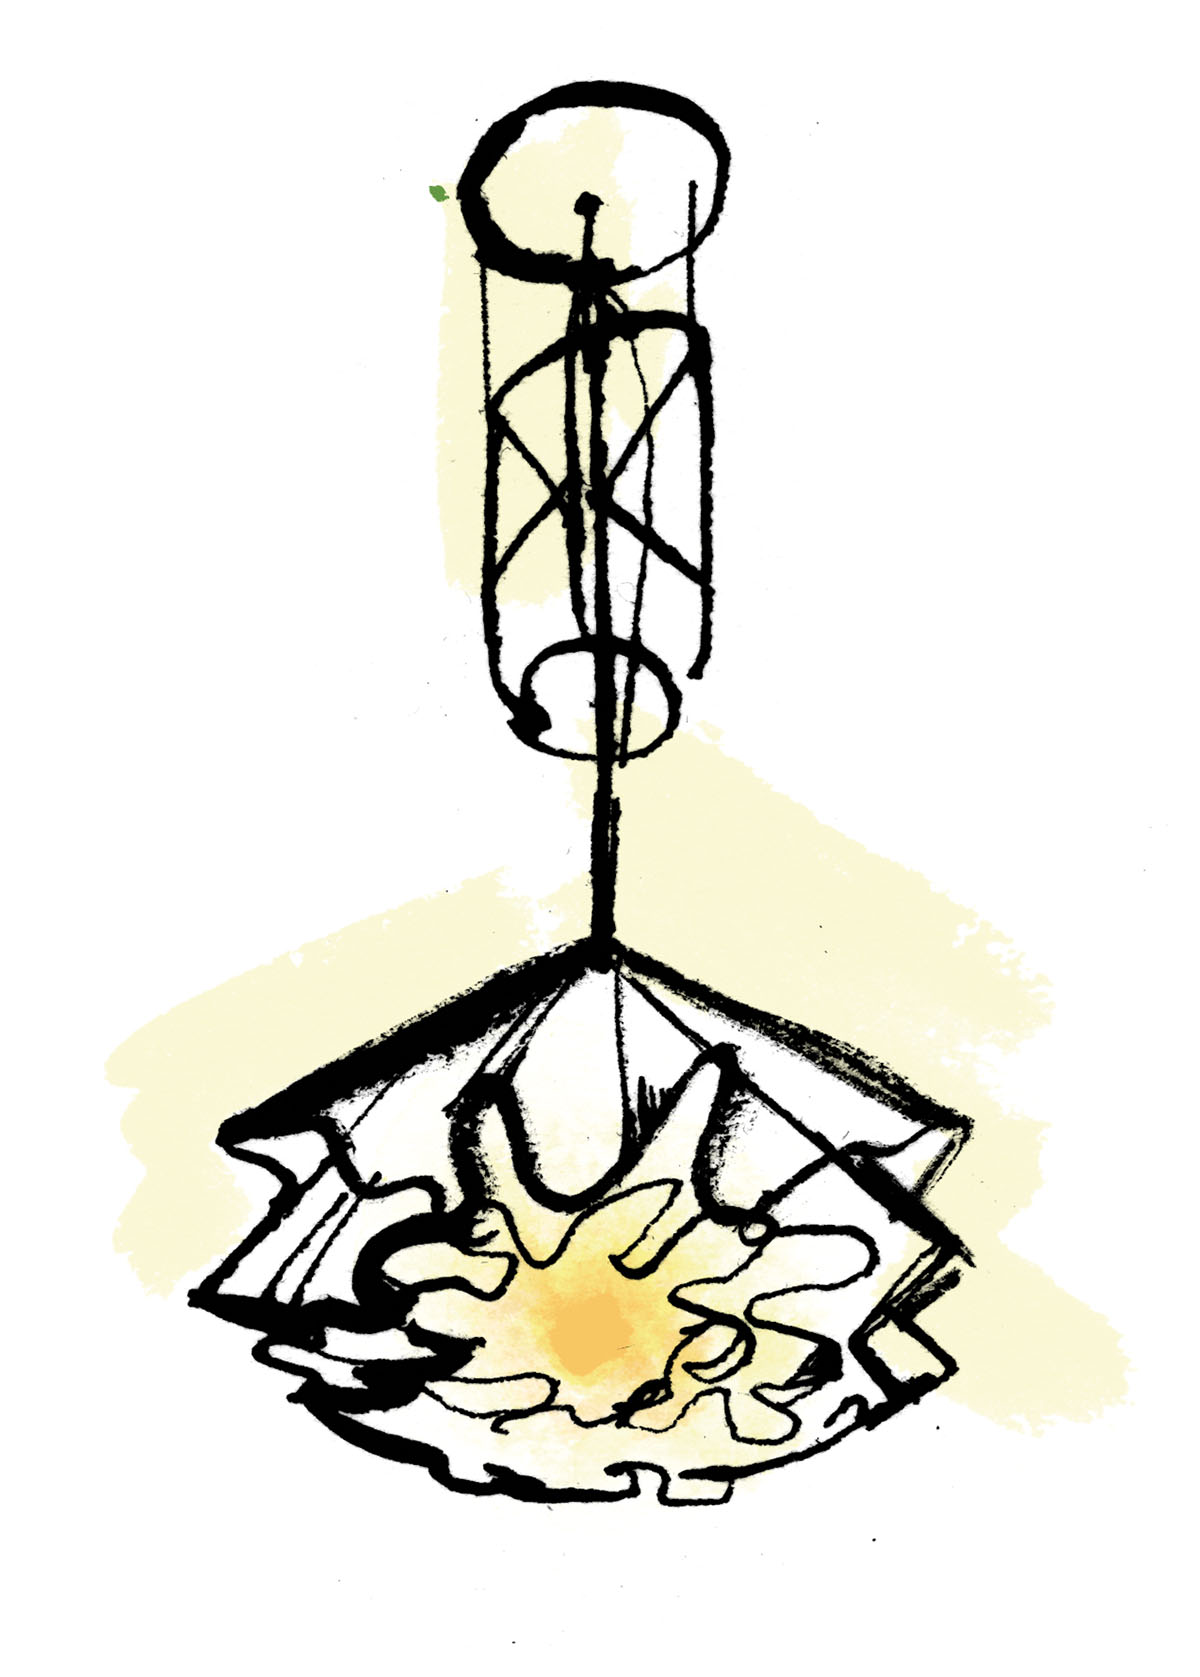 An illustration of a frilly yellow lamp hanging from the ceiling